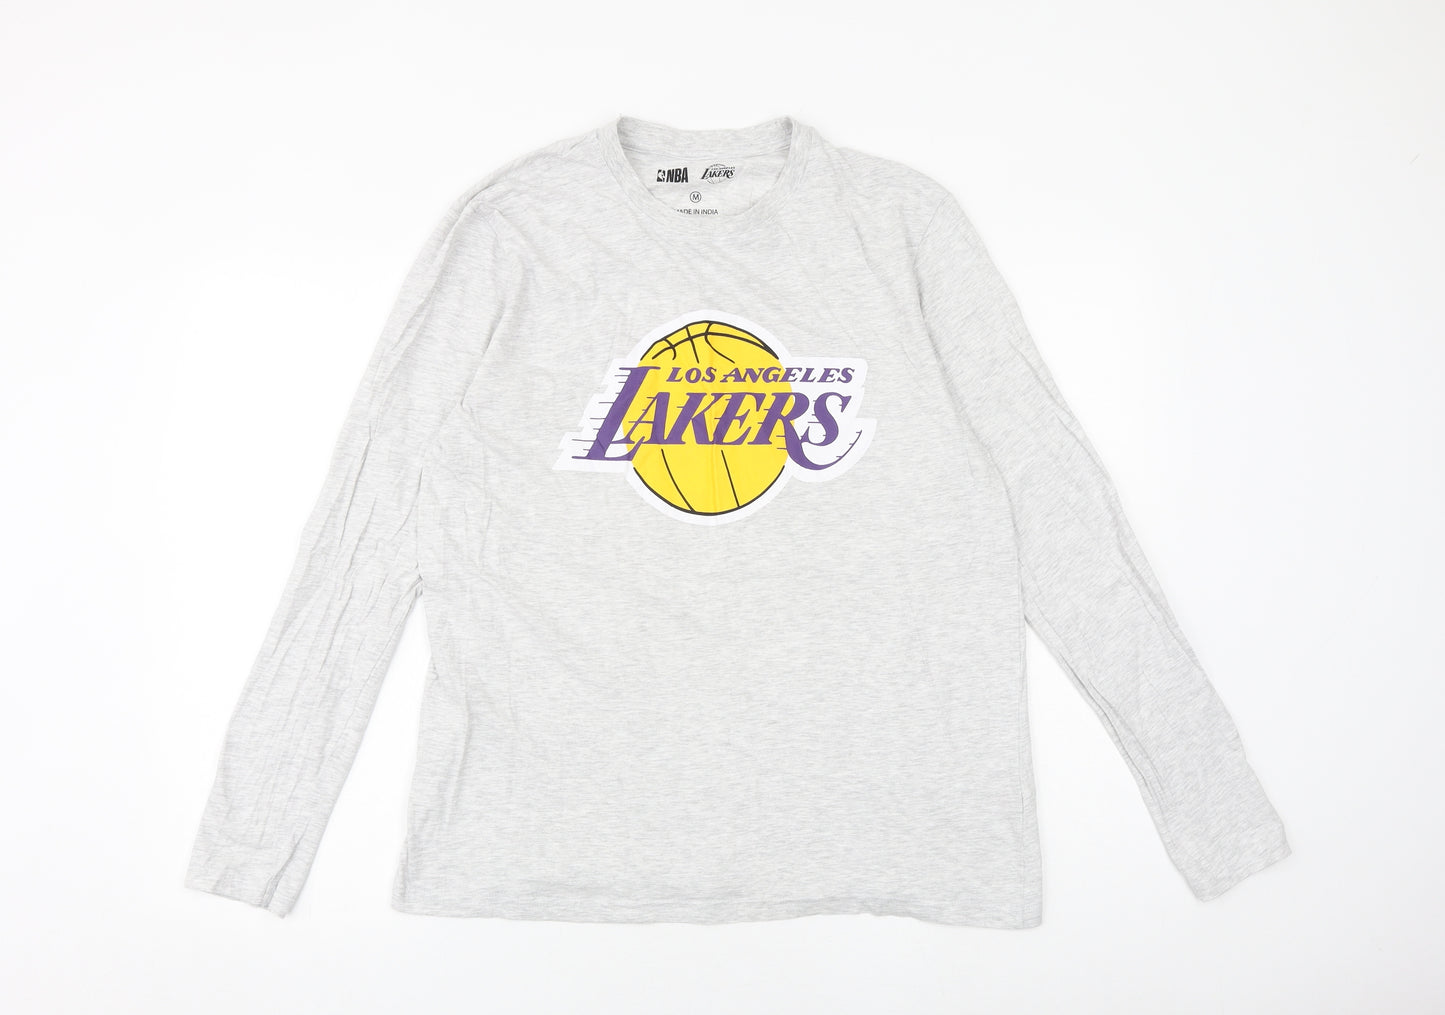 Lakers Mens Grey Cotton T-Shirt Size M Round Neck